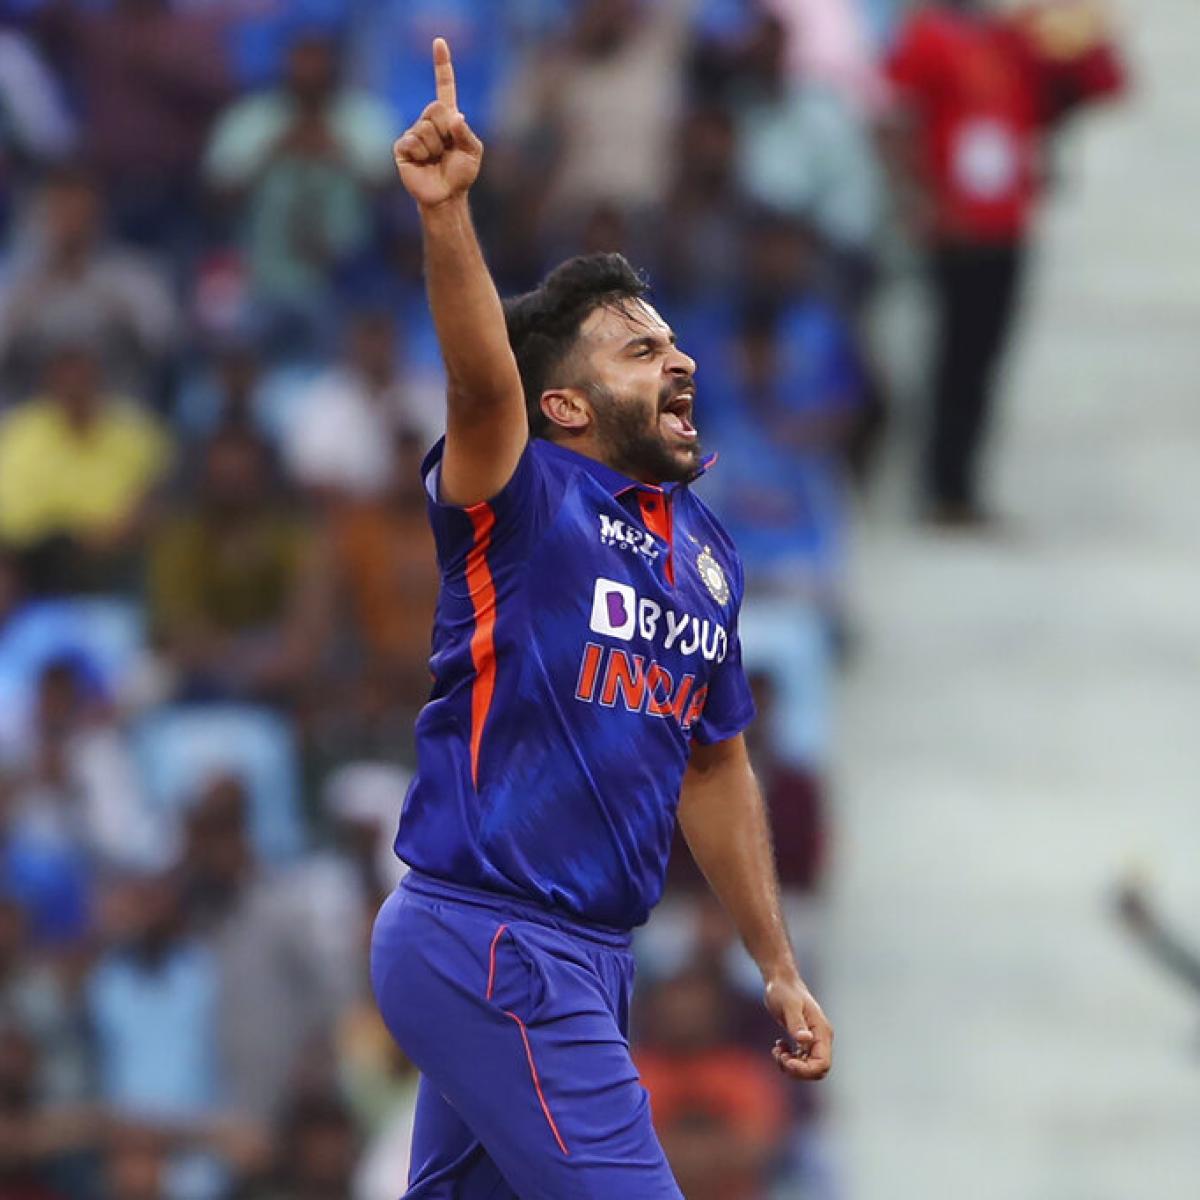 IND vs AUS: Revealed: Why Shardul Thakur Is Not Playing Today’s ODI Match vs Australia?